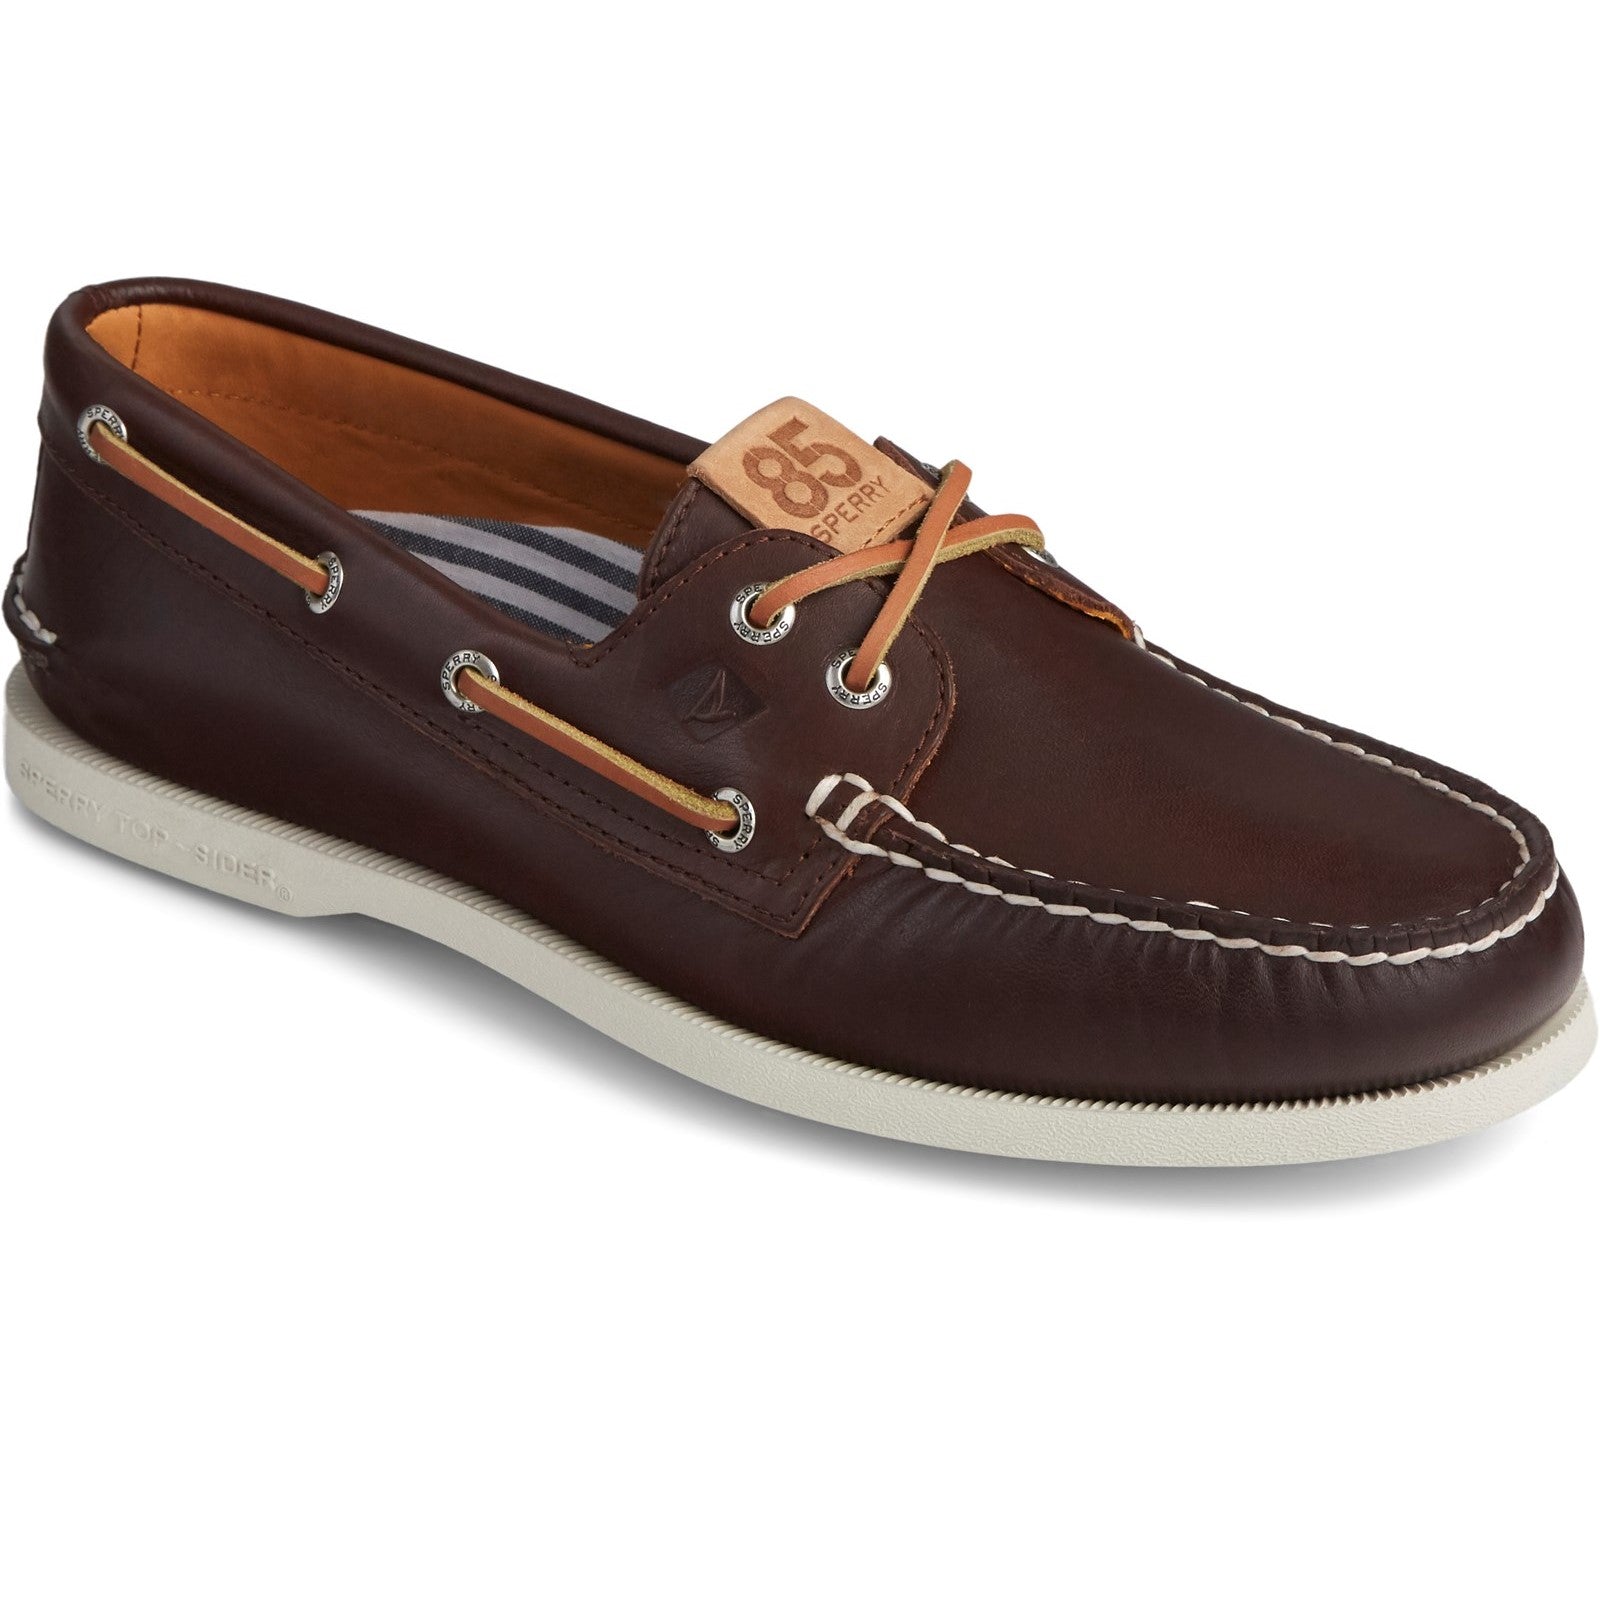 Sperry Top-sider Authentic Original 85th Anniversary Boat Shoe